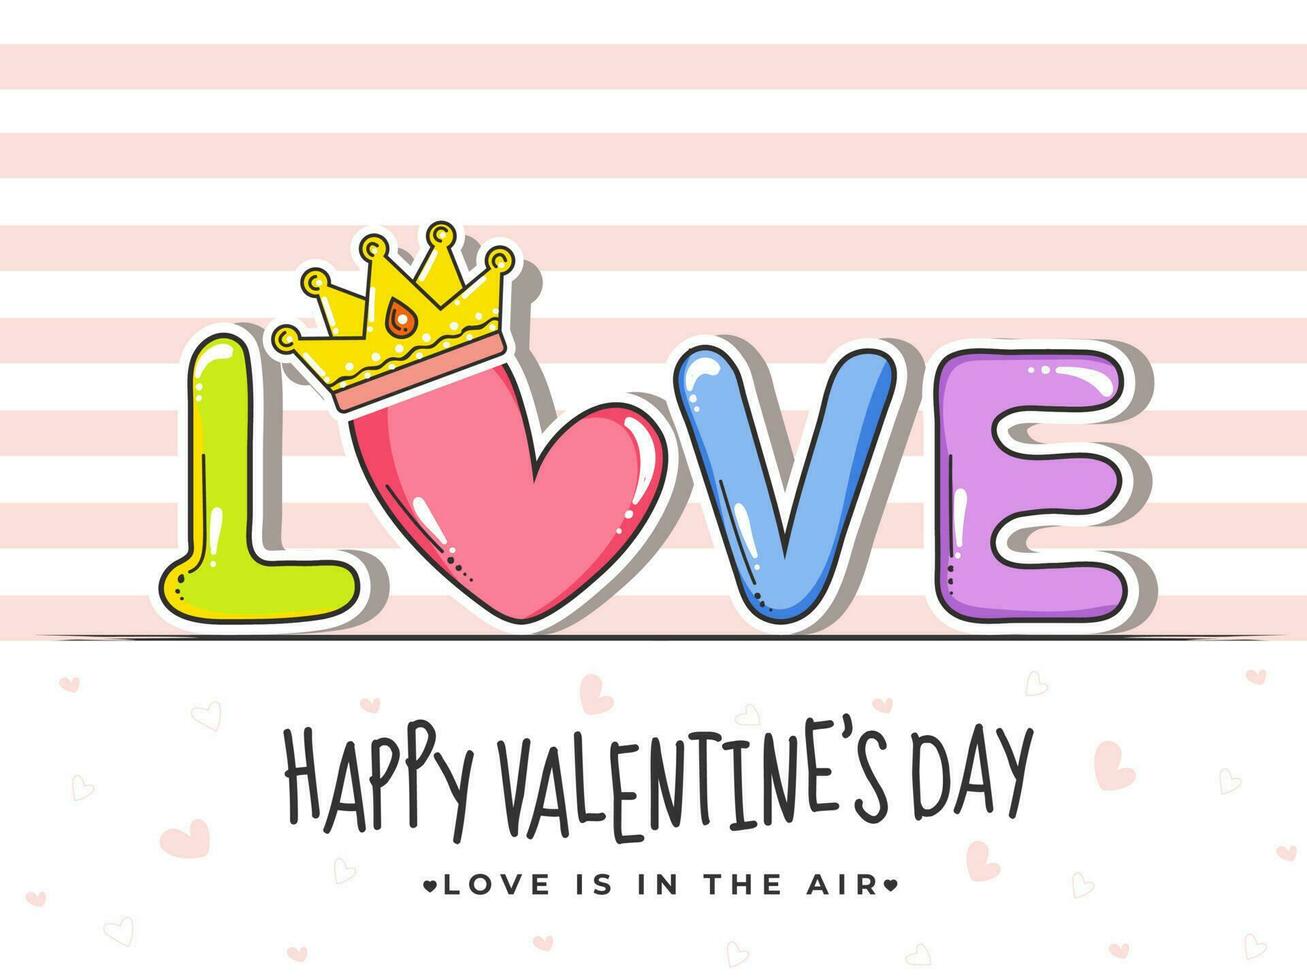 Sticker Style Colorful Love Text with Crown on Striped White Background for Happy Valentine's Day, Love is in the air. vector